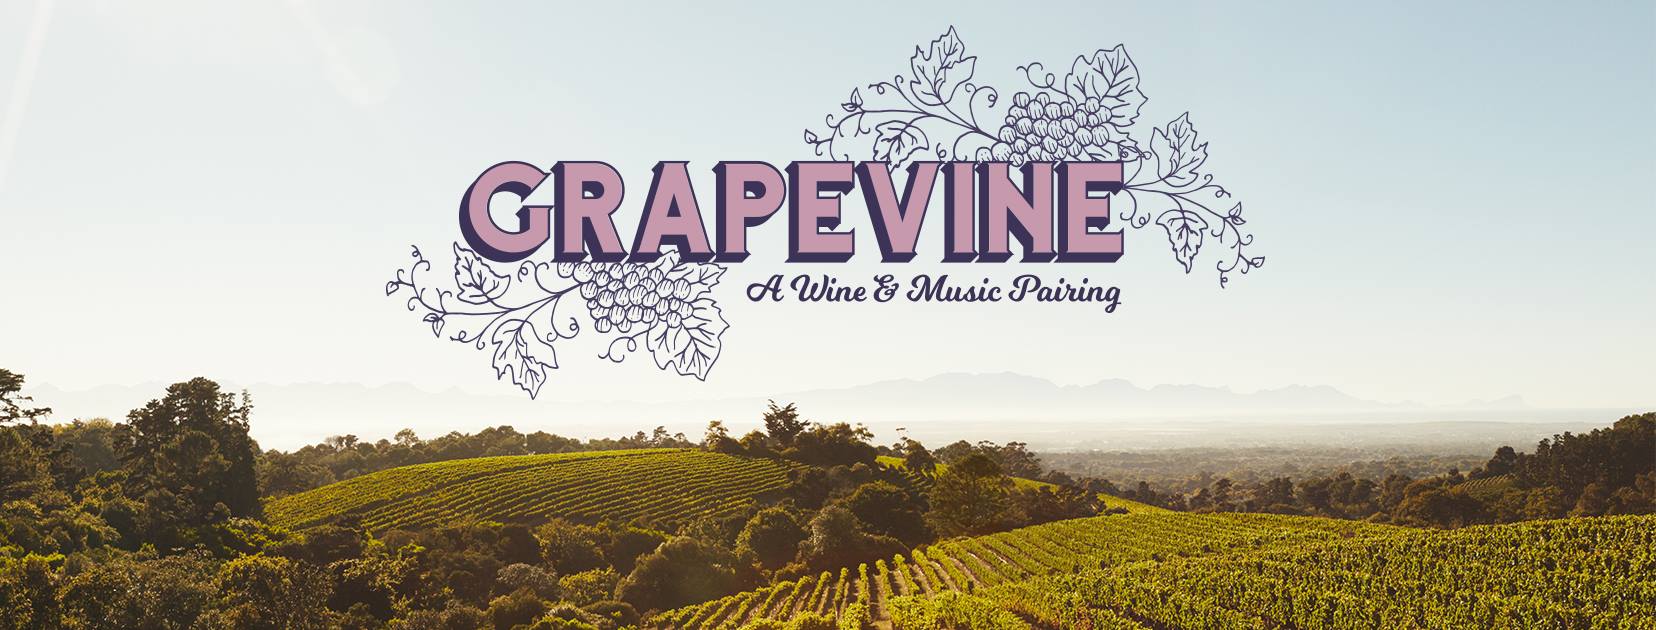 Raise a glass to Grapevine, a new festival fusion of music and wine